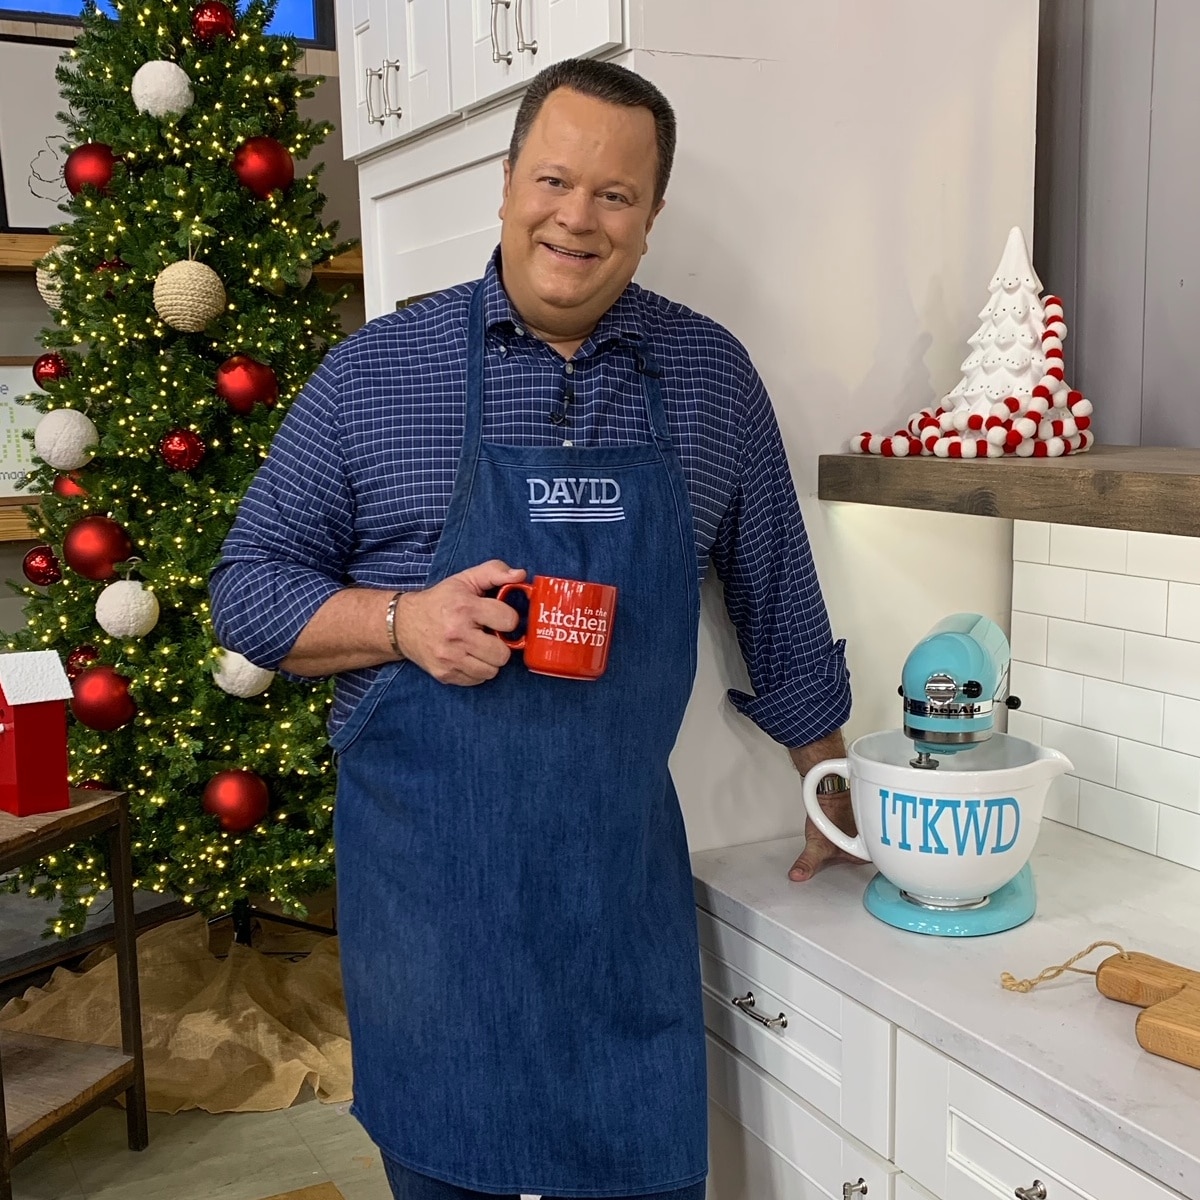 SHURCH COM QVC #39 s David Venable Reveals What #39 s In His Kitchen